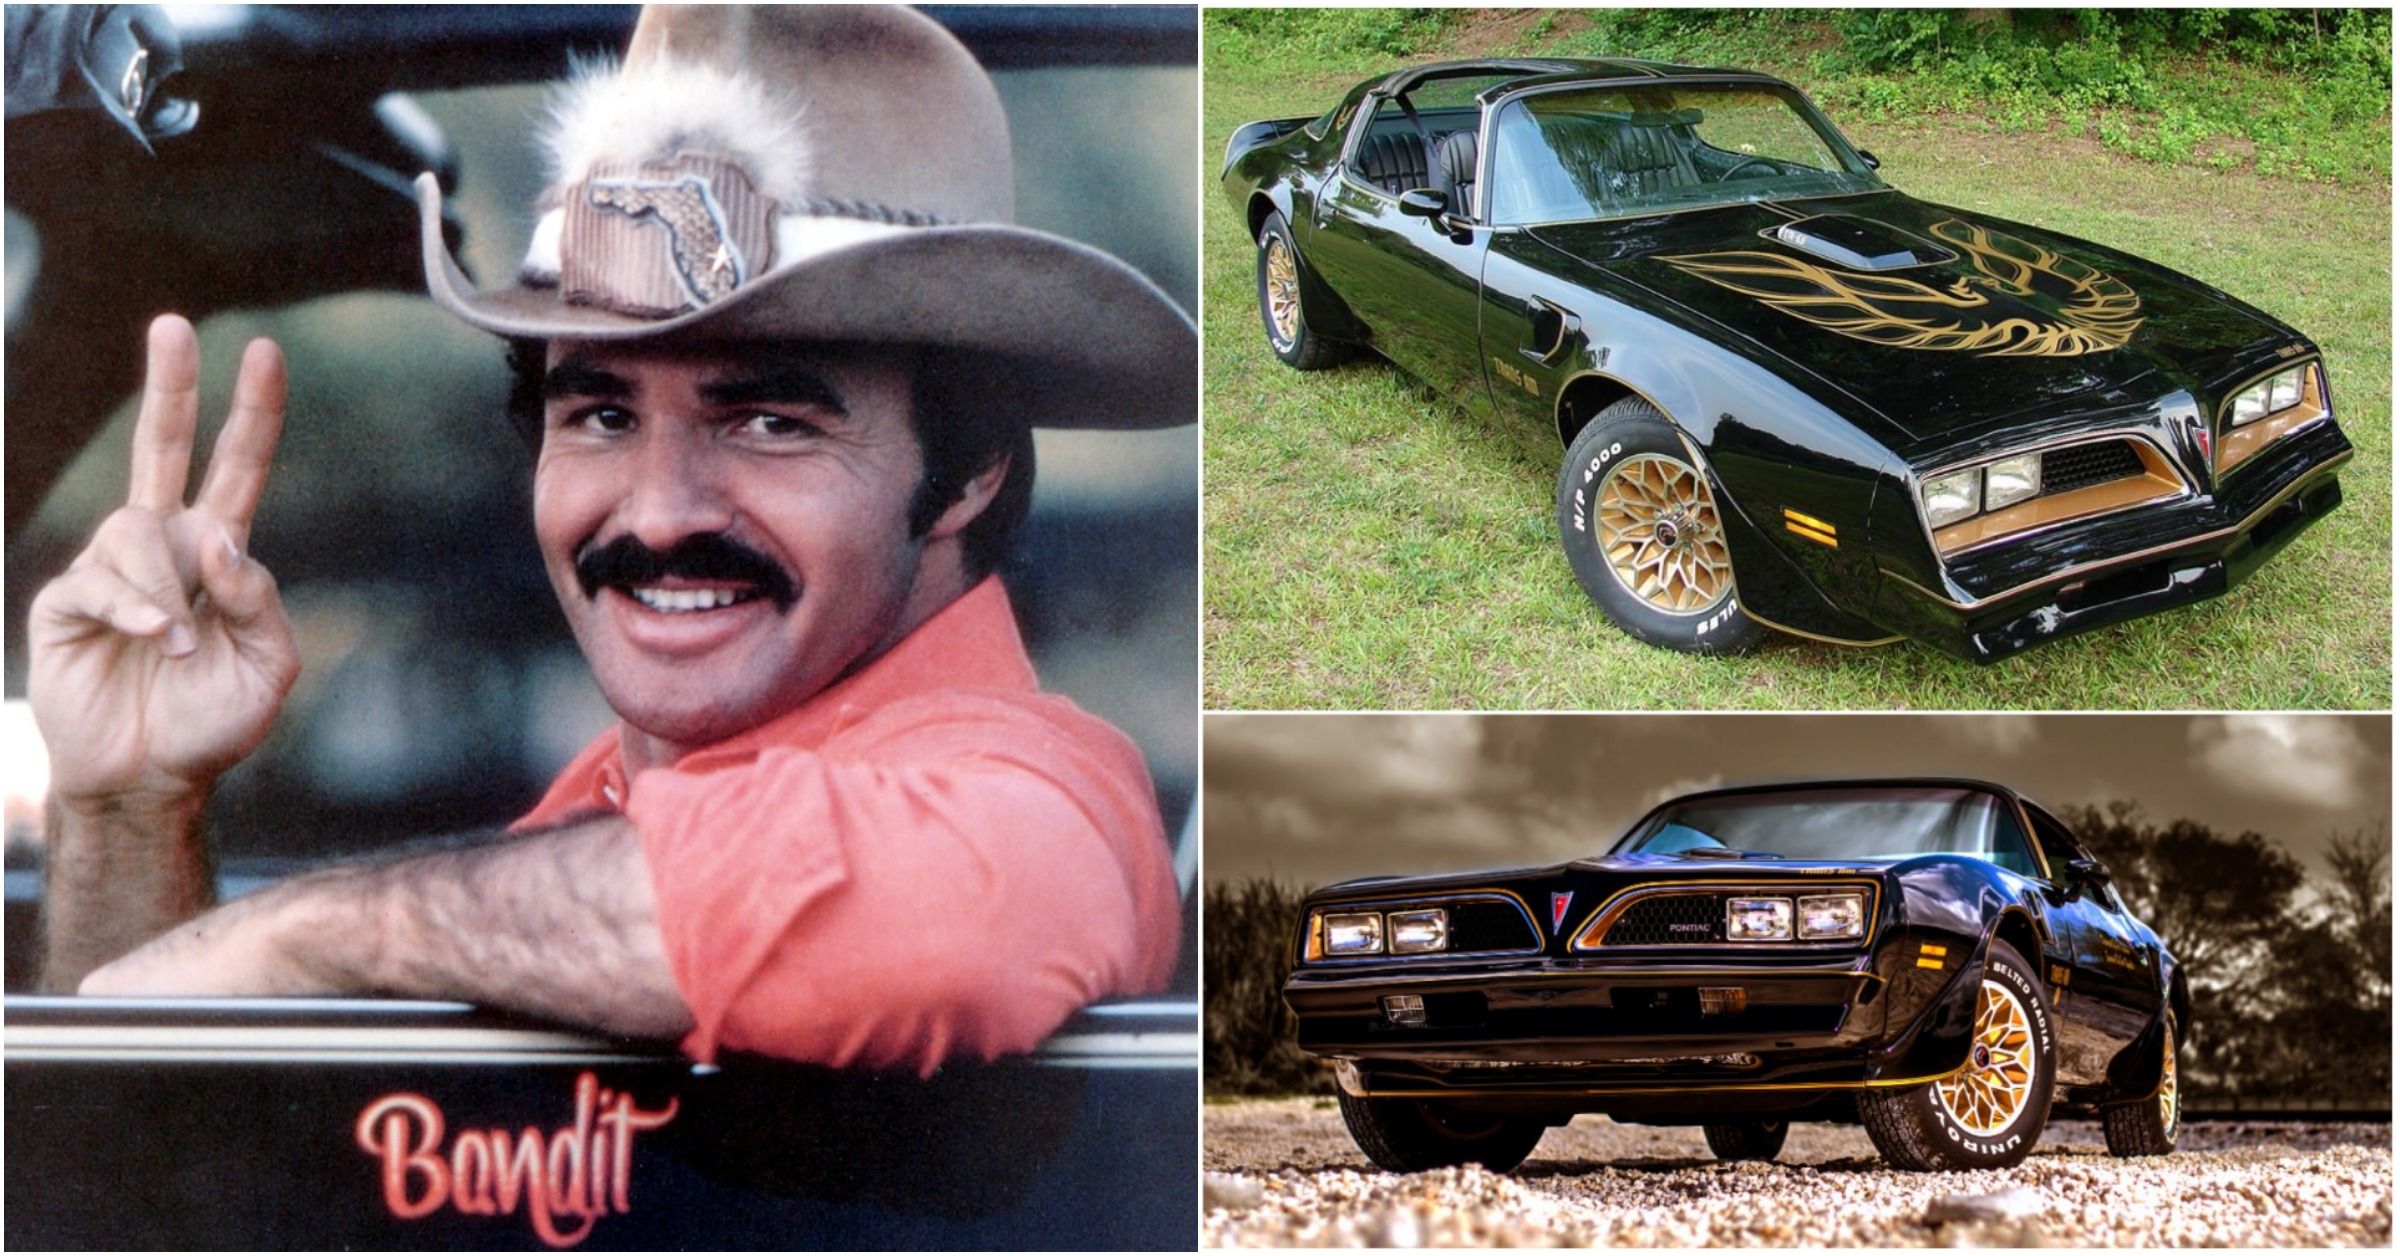 smokey and the bandit movies how many